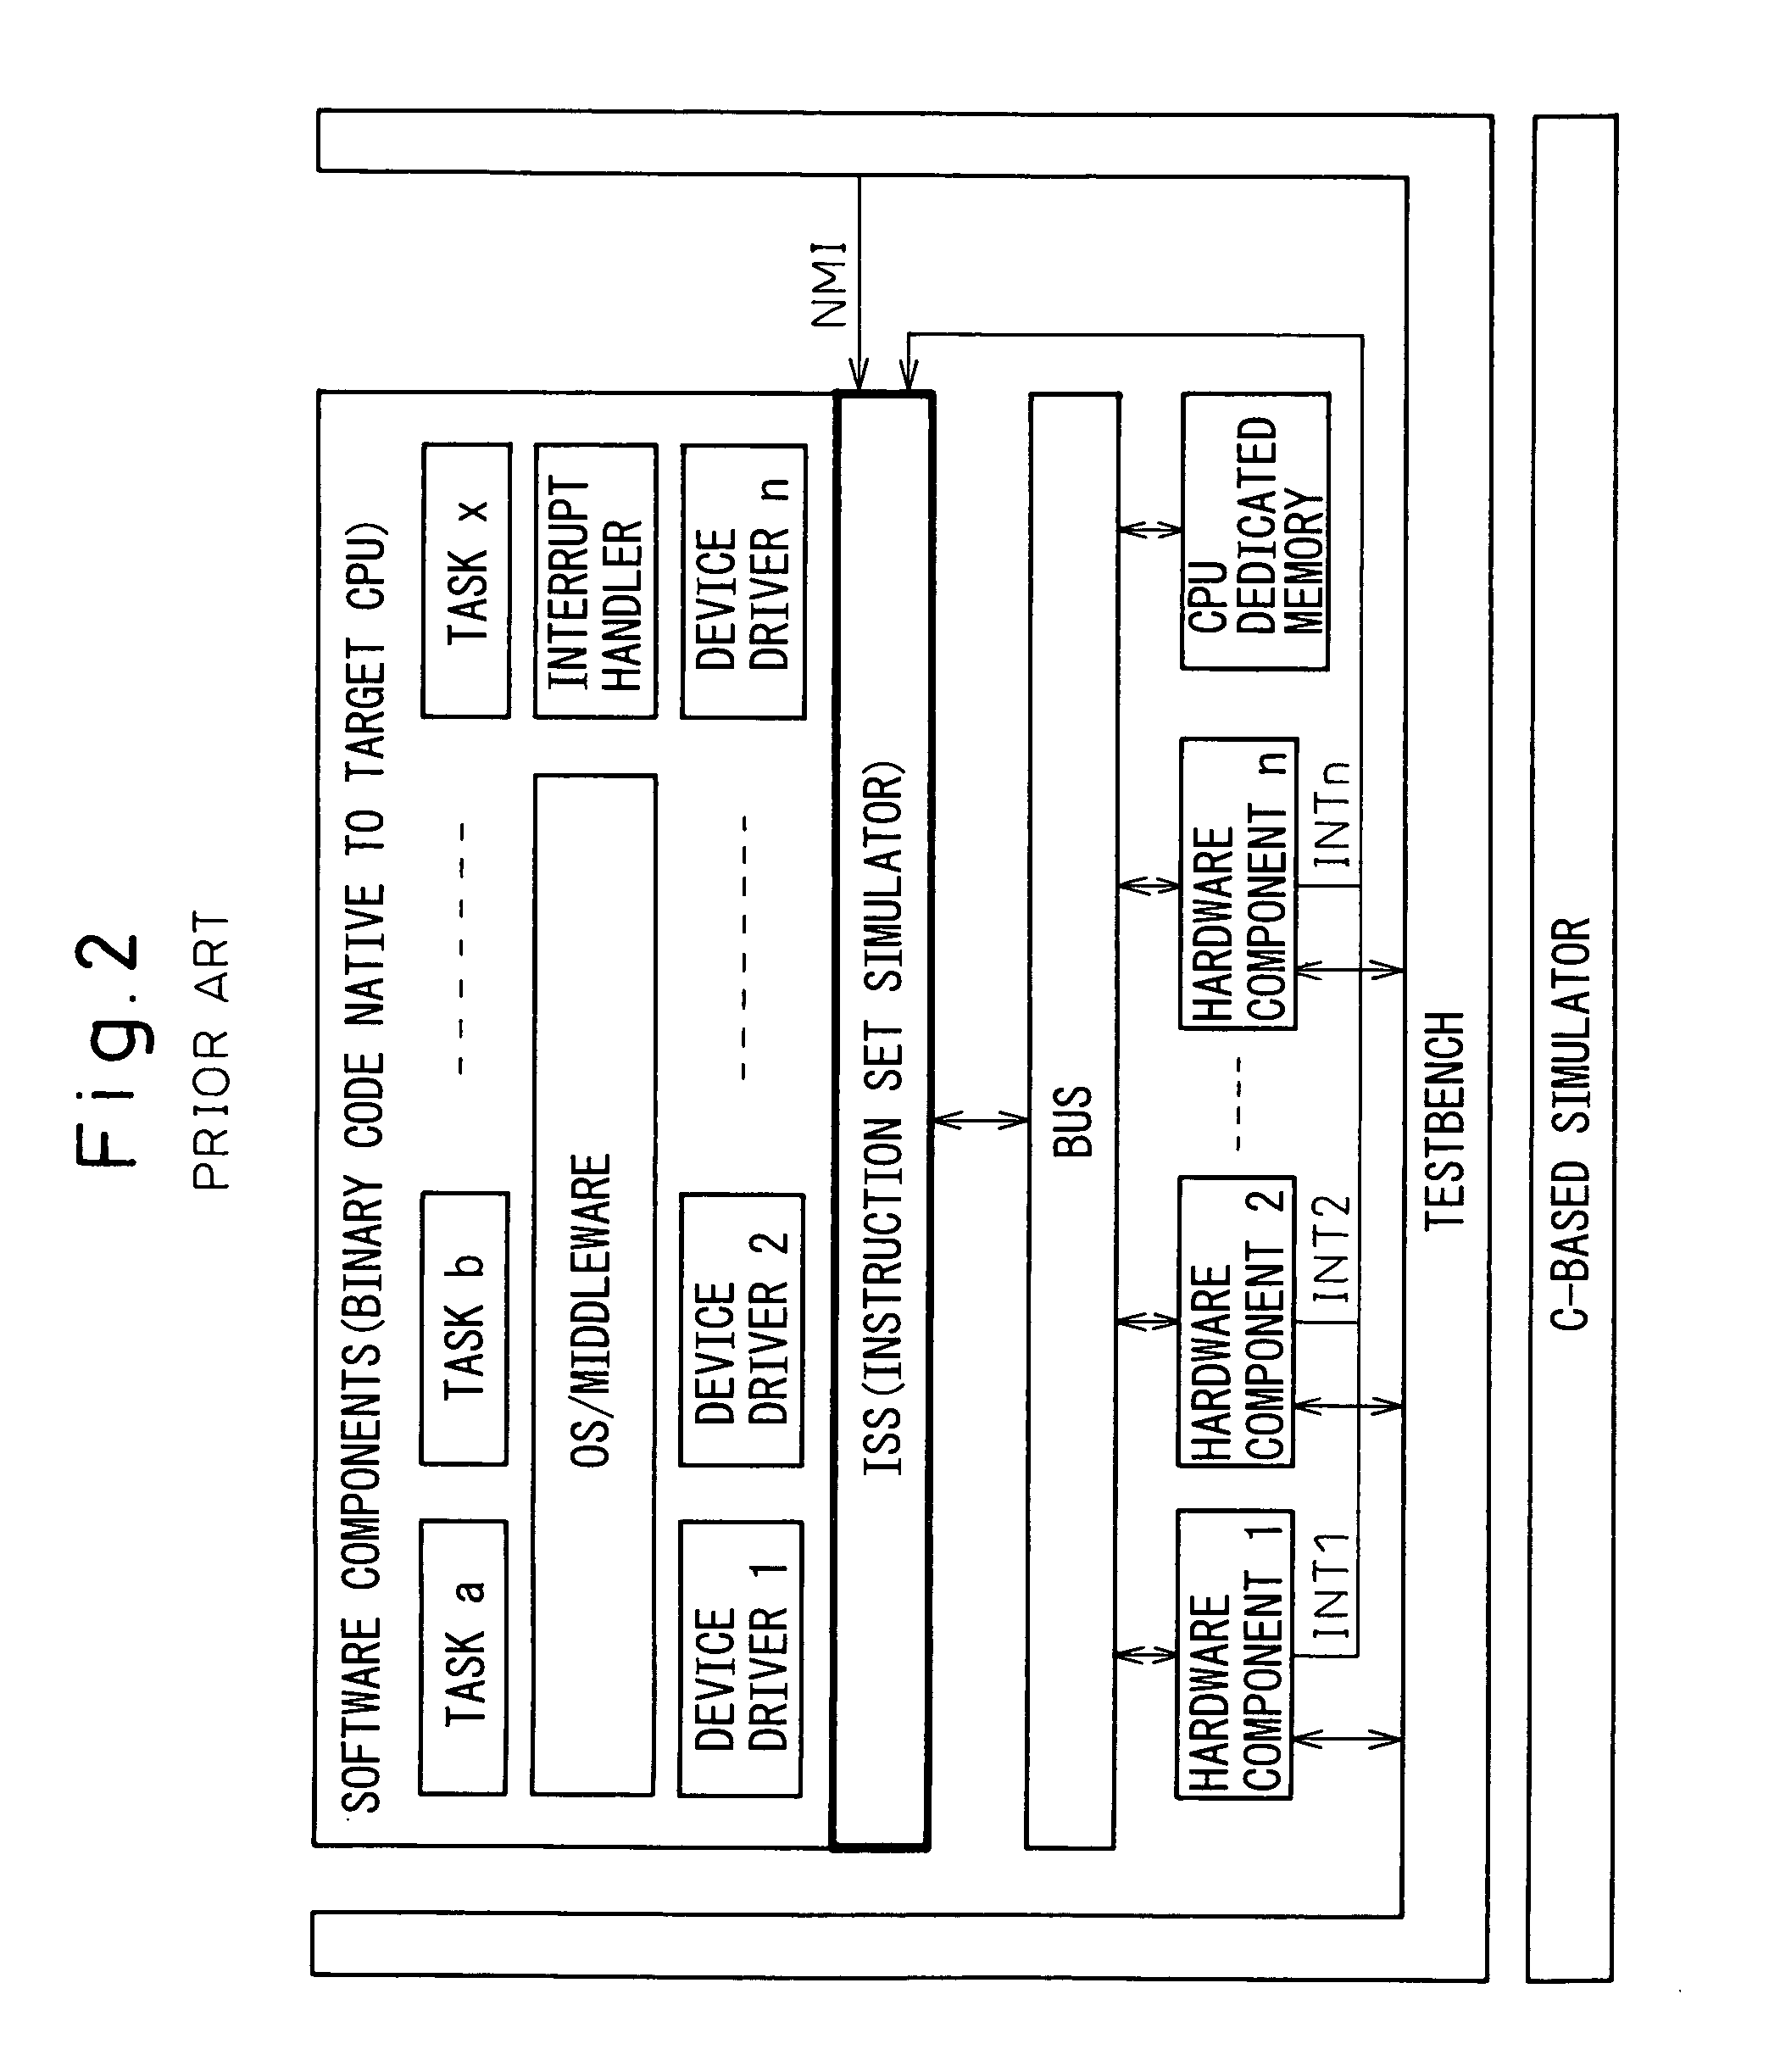 Method for co-verifying hardware and software for a semiconductor device